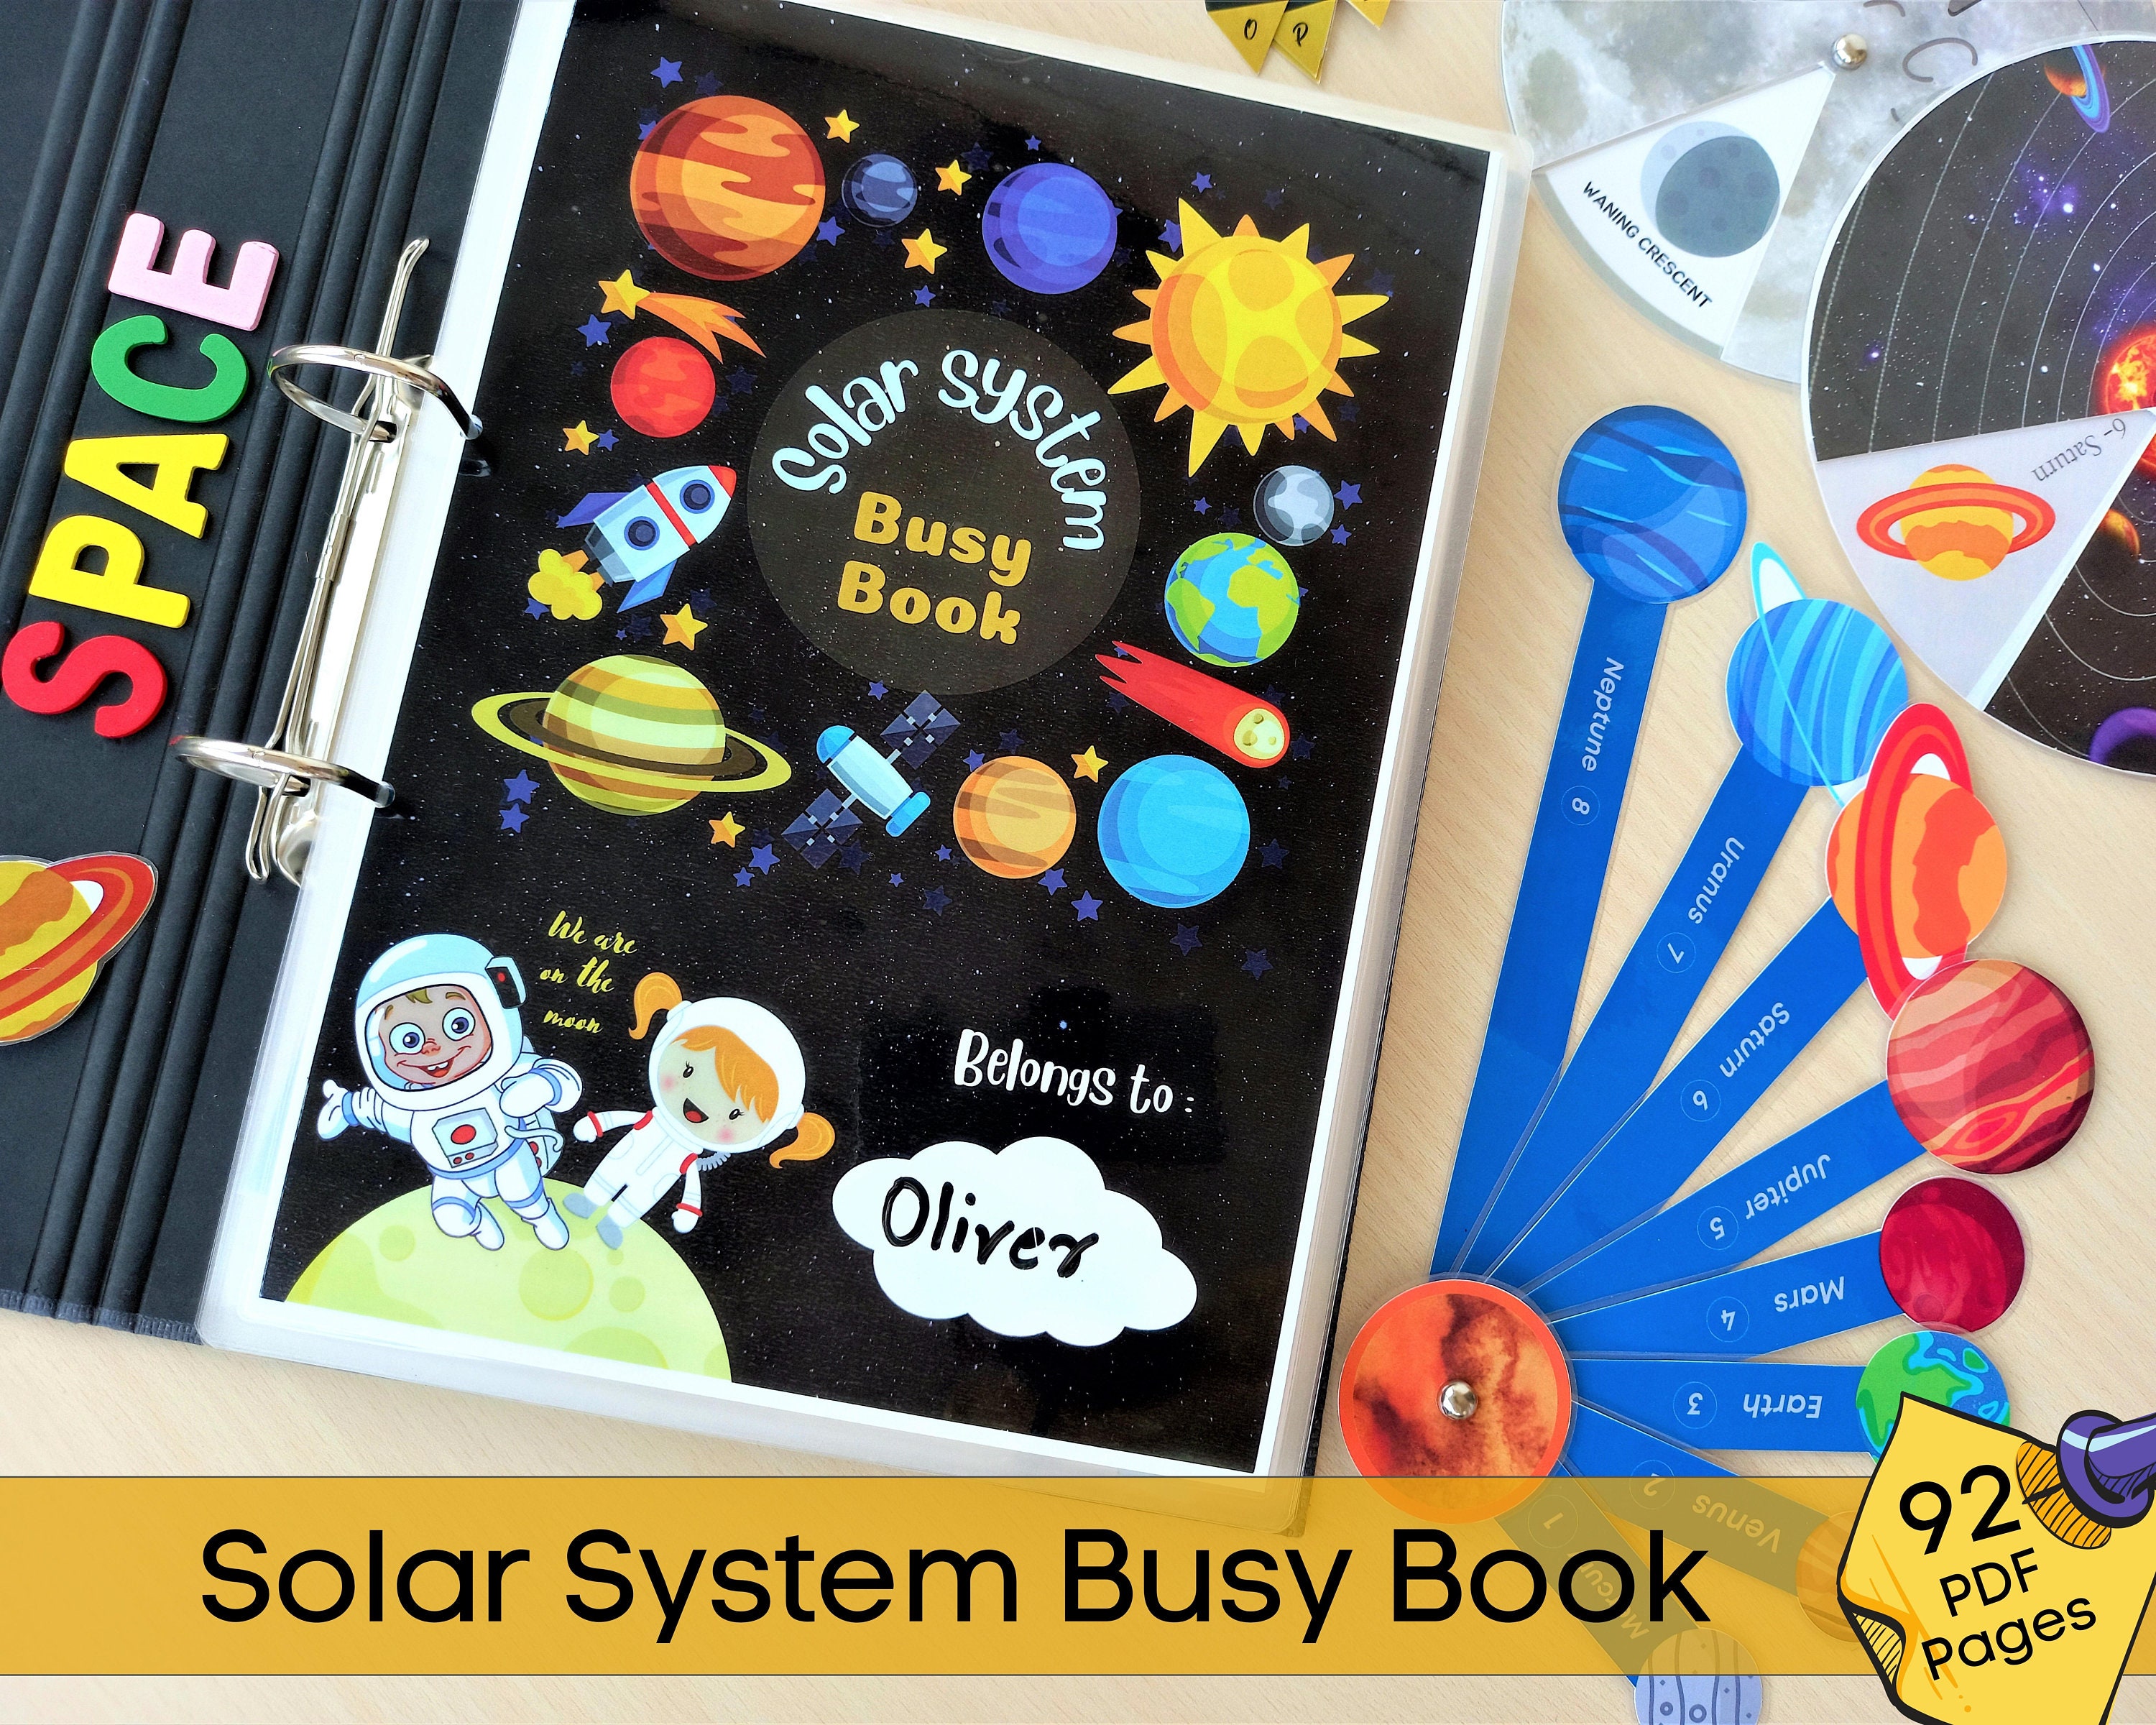 Space Sewing Kit for Kids Solar System DIY Activity Explore Solar System,  Science Activities - Educational Gifts for Boys Girl